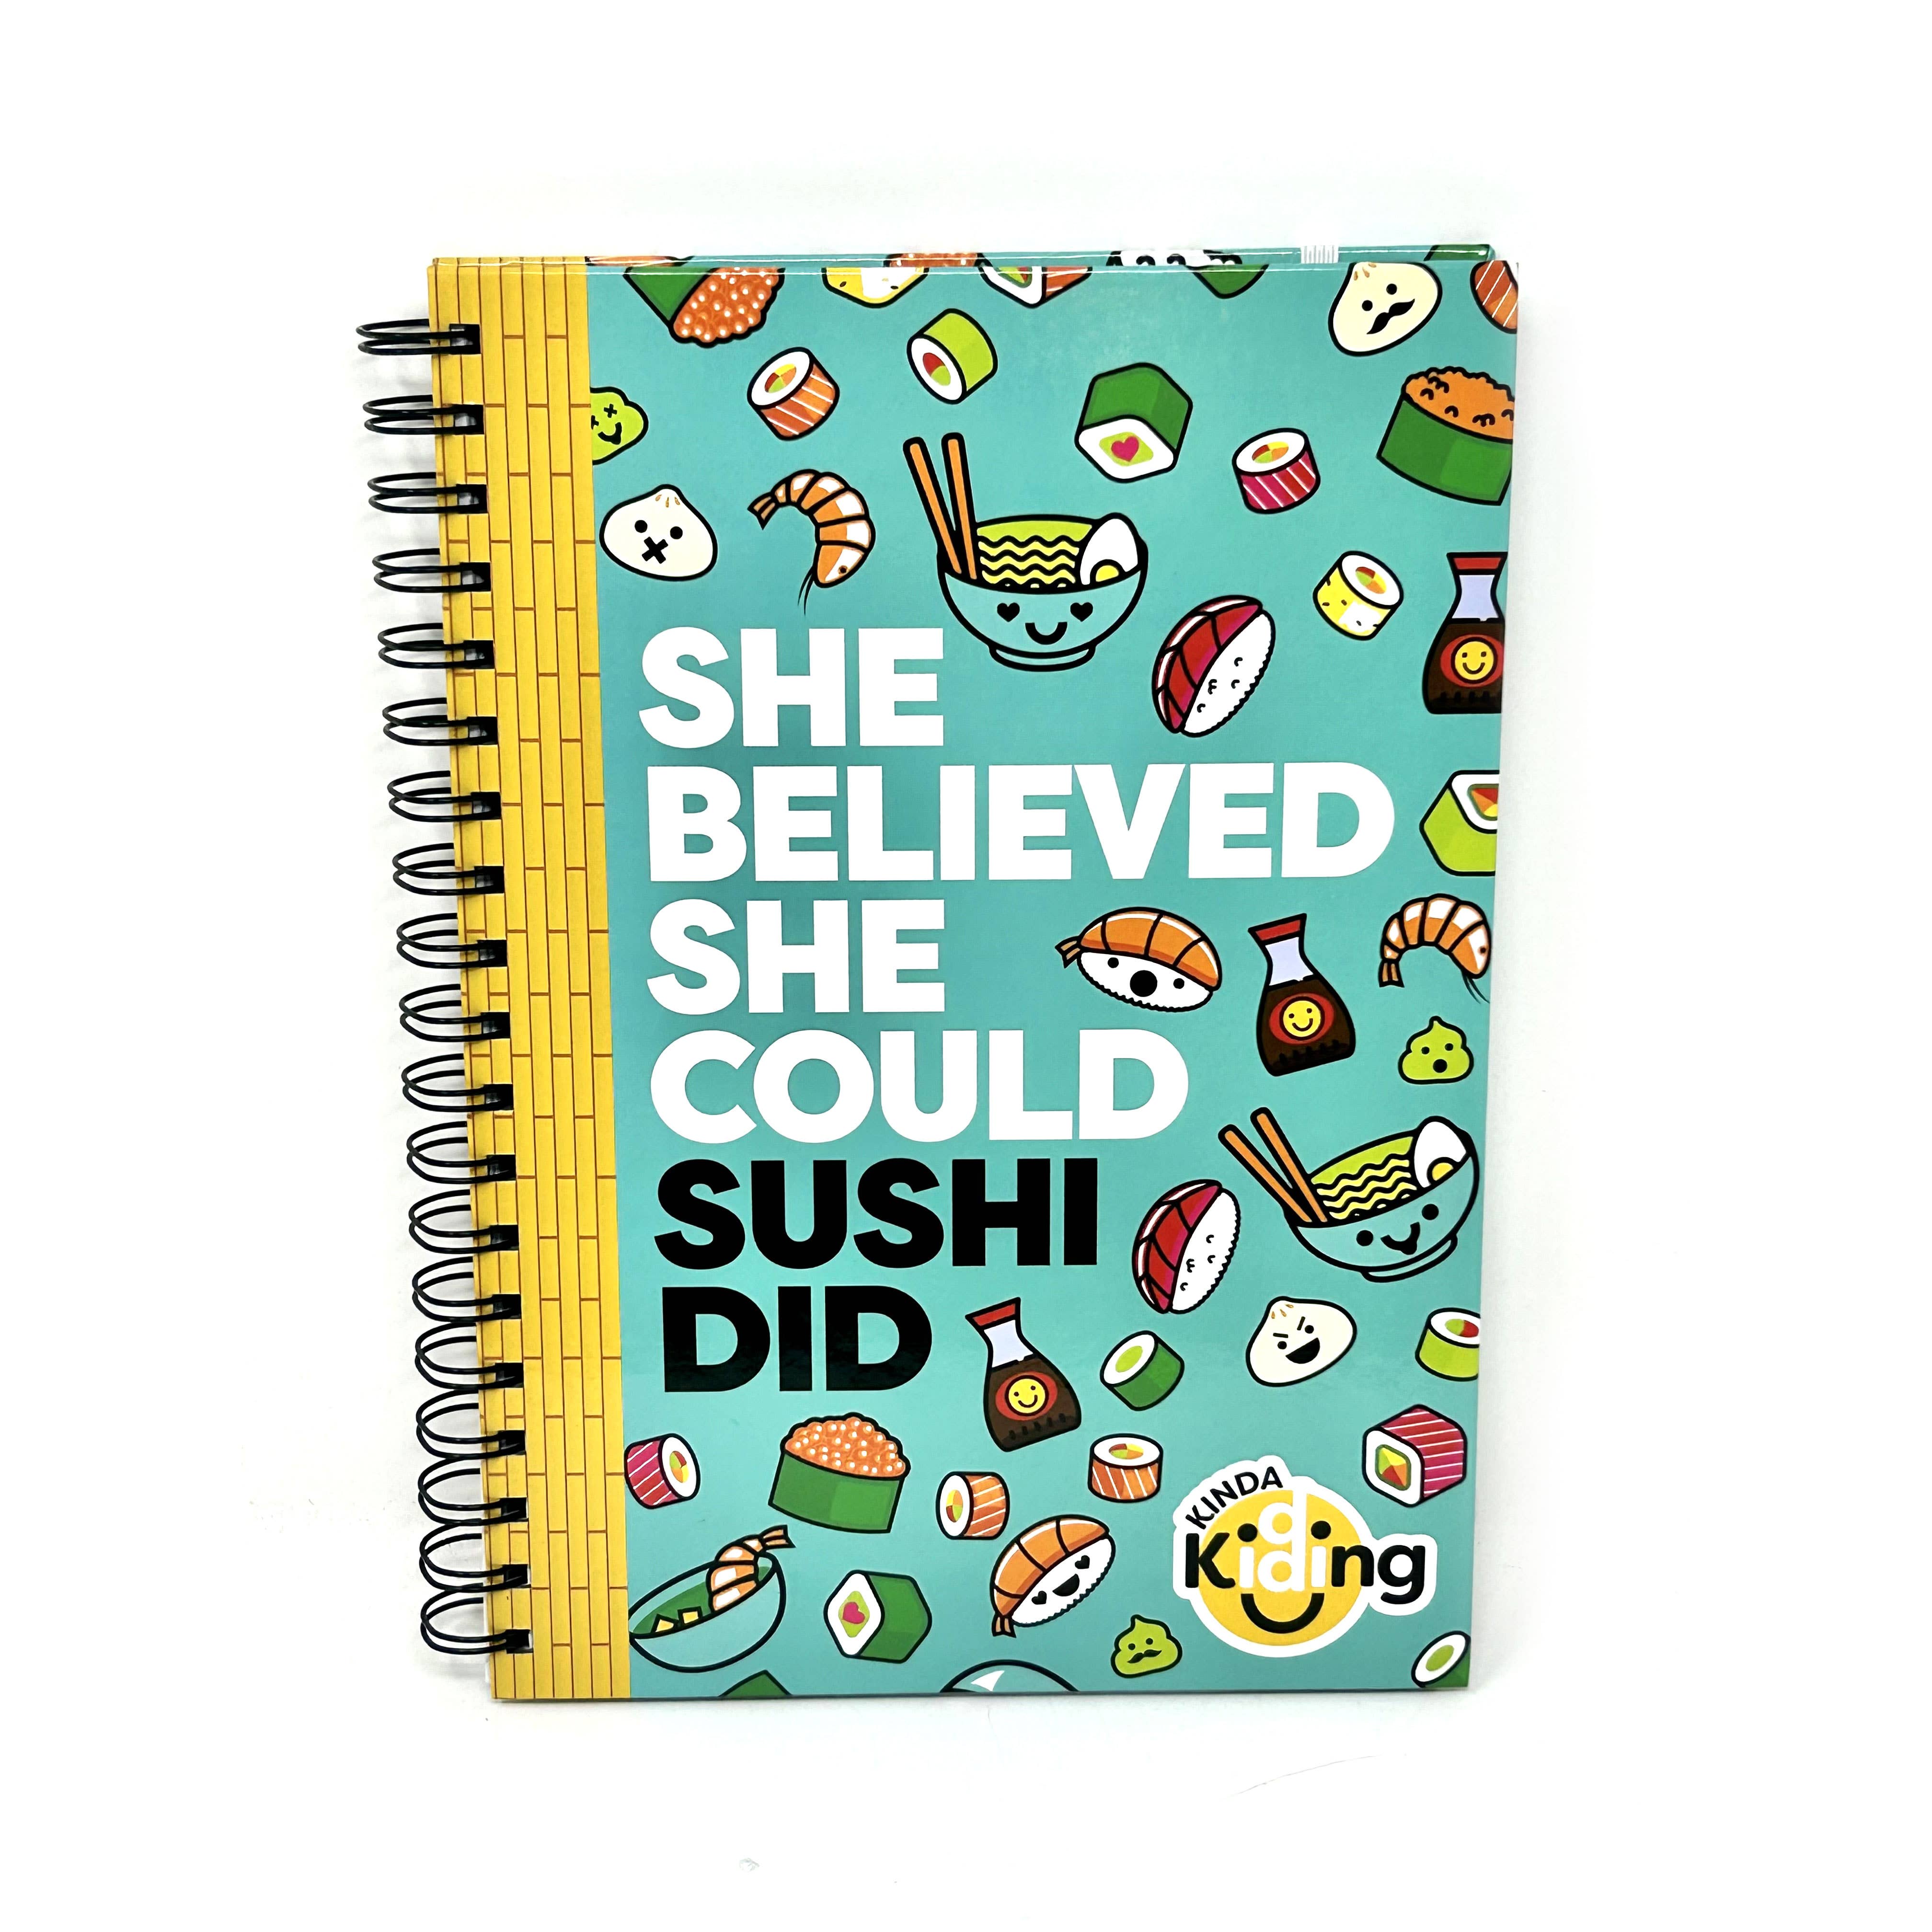 She Believed She Could Sushi Did Spiral Bound Notebook